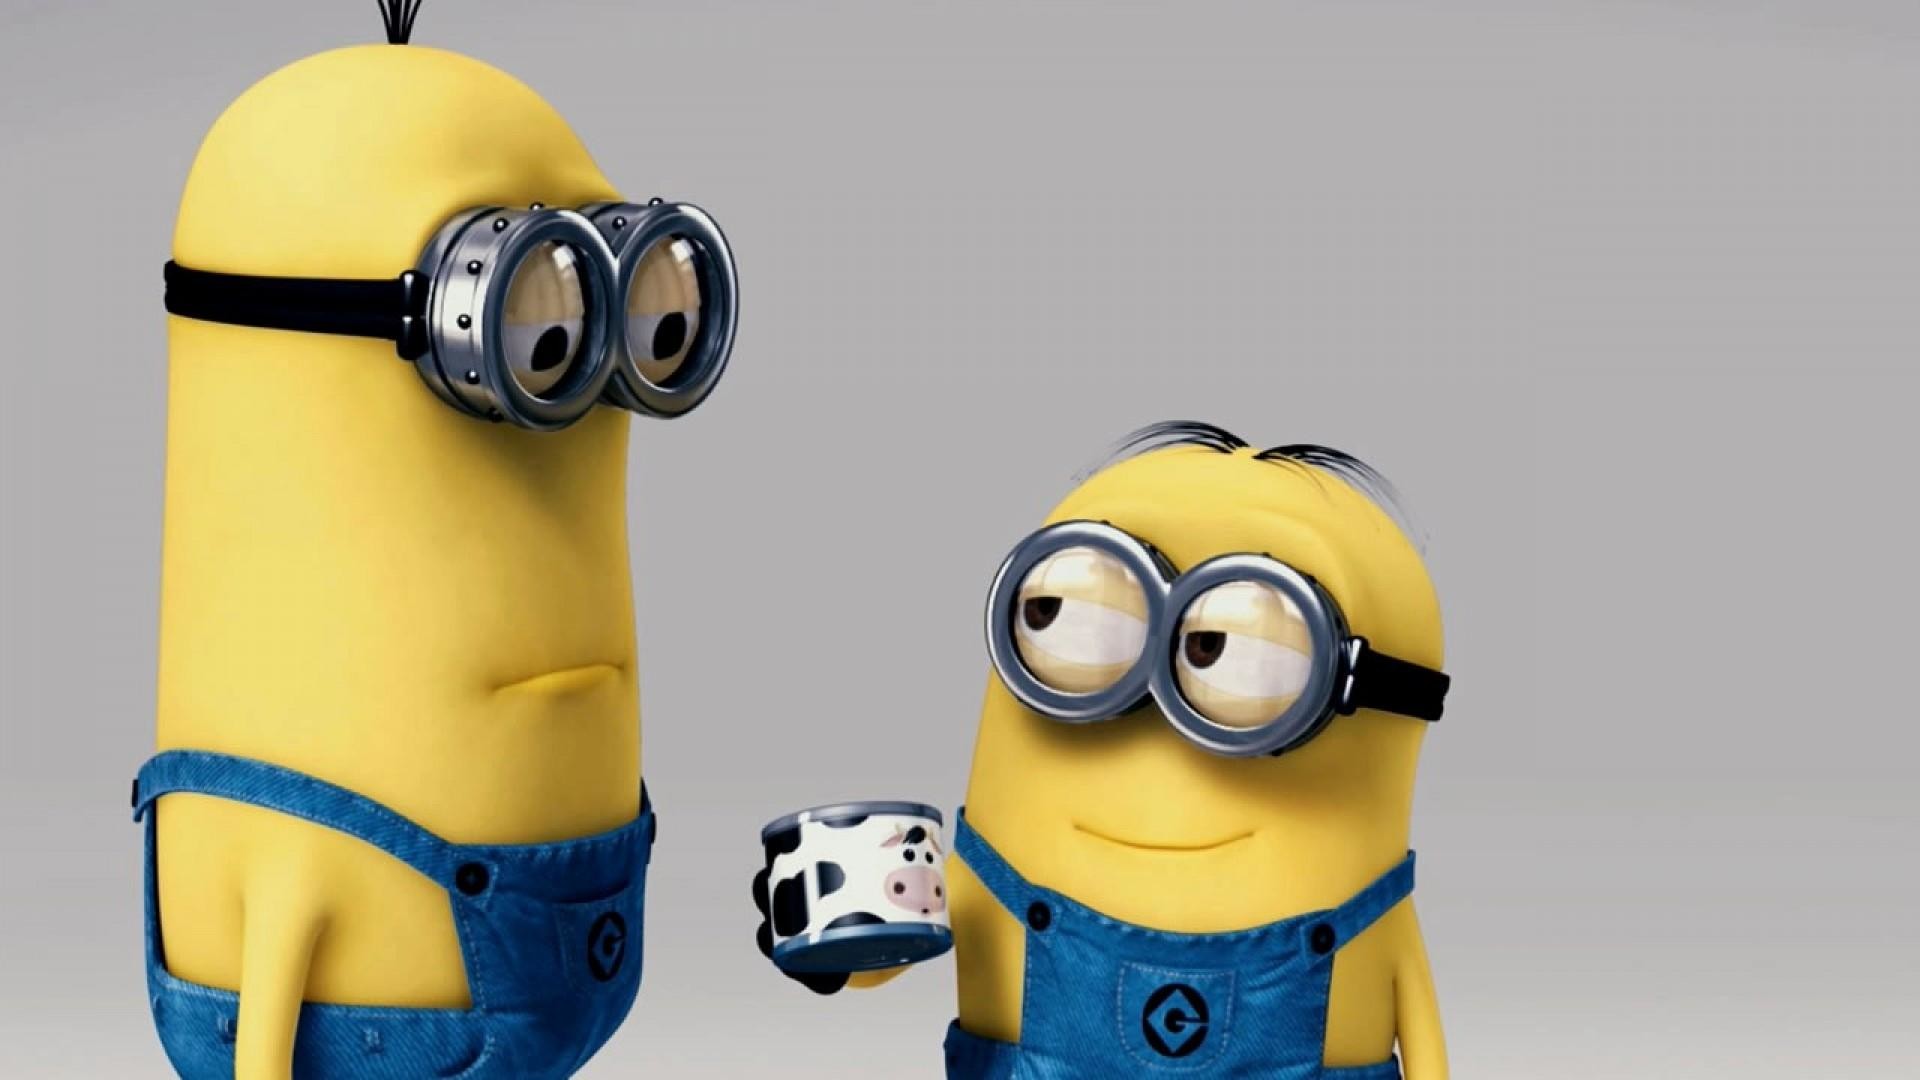 69+ Minion Wallpaper for Android